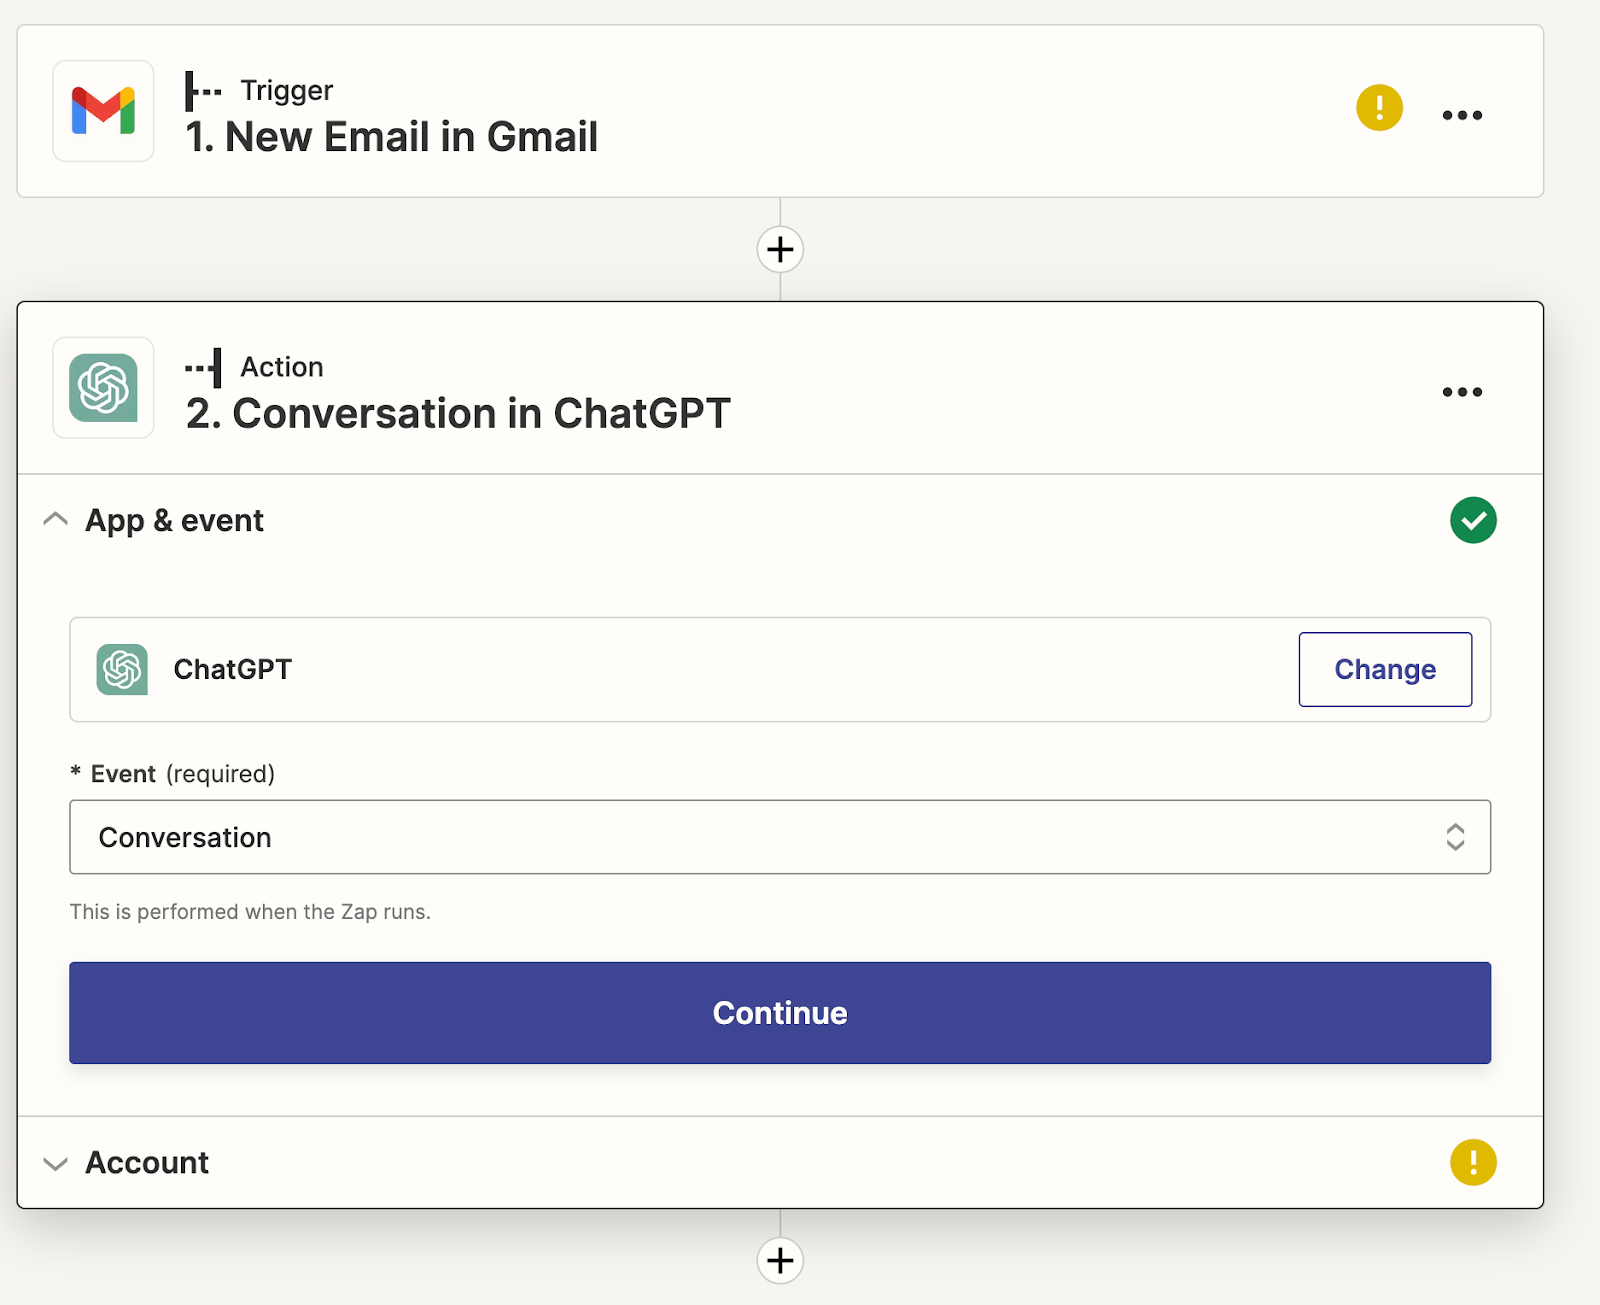 This integration allows for smooth communication between your email platform and the power of ChatGPT's conversational capabilities.